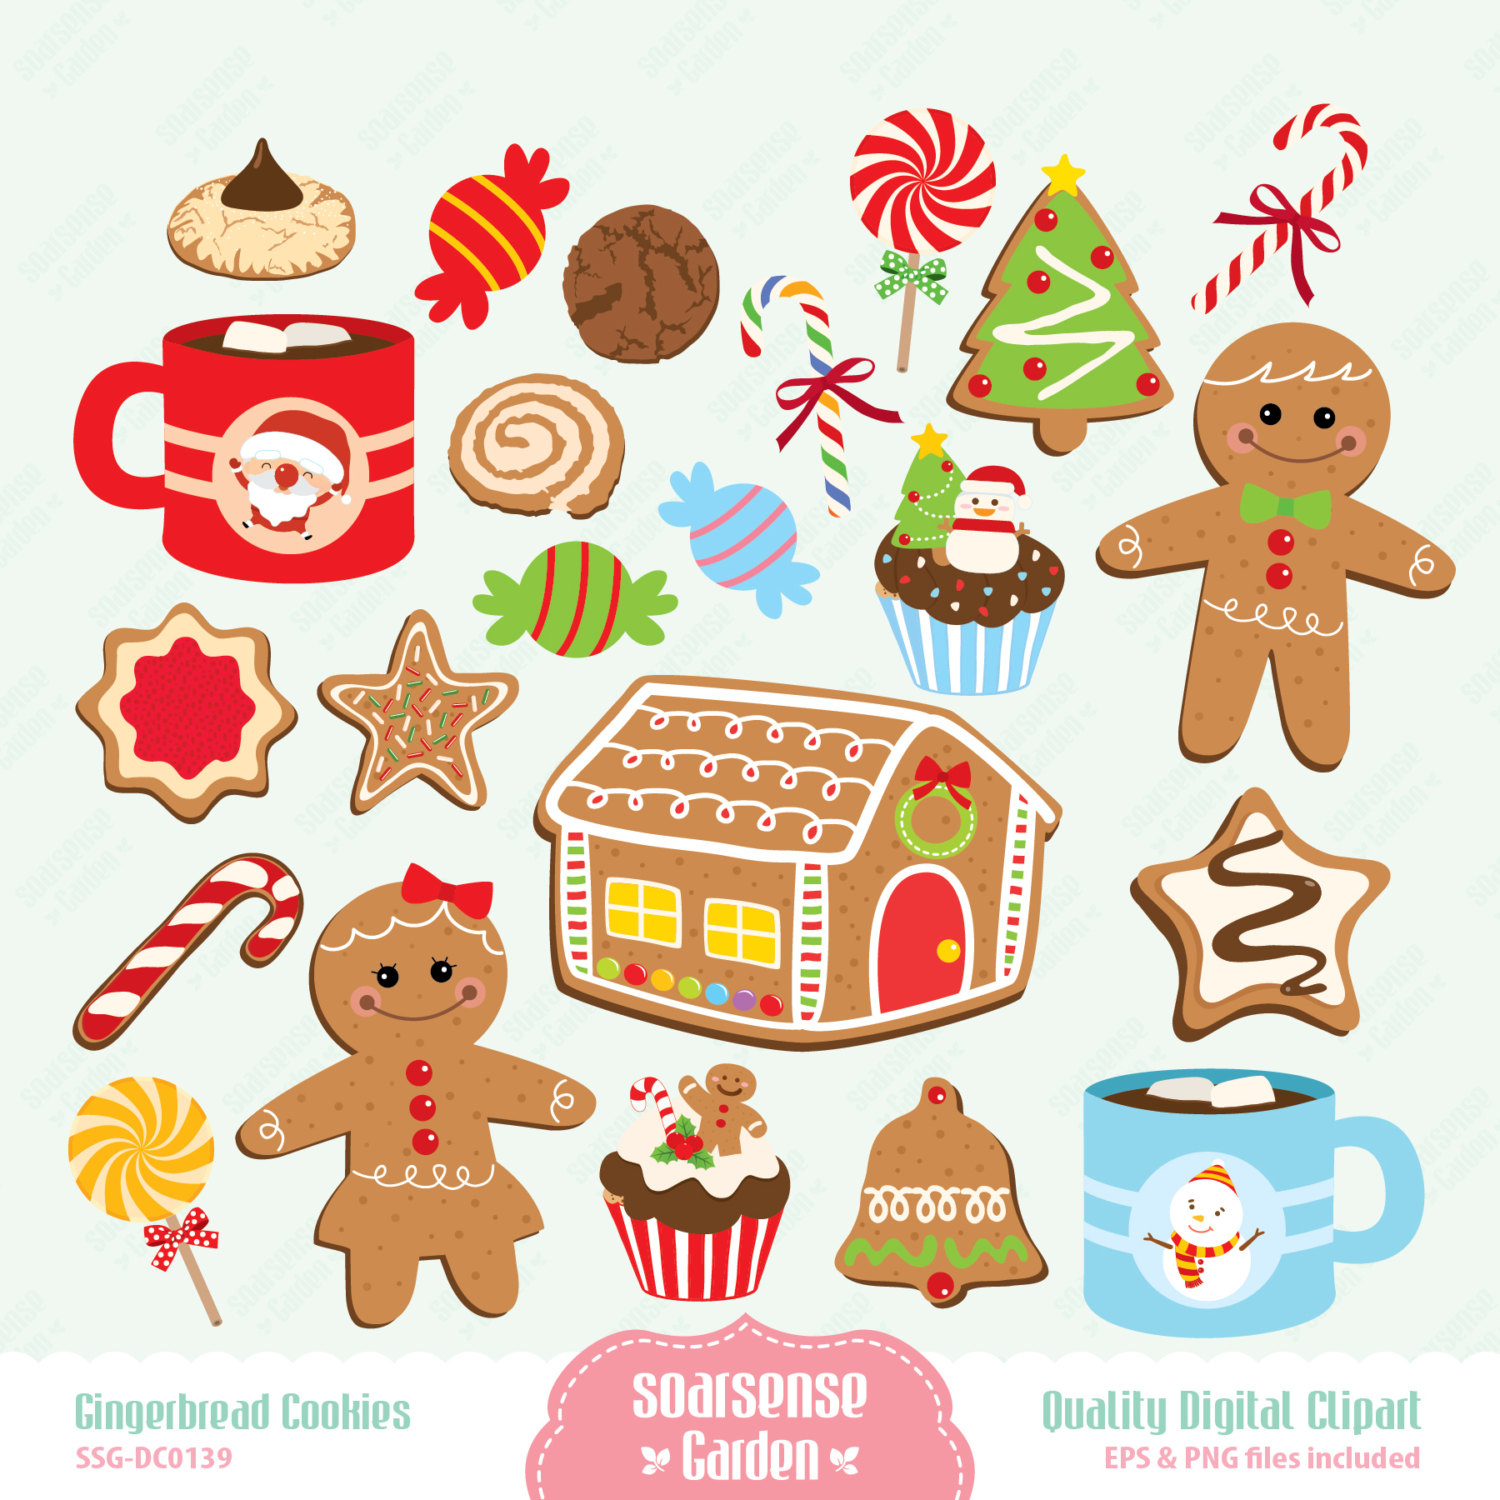 Free Vintage Gingerbread Cliparts, Download Free Clip Art, Free Clip Art on Clipart ...